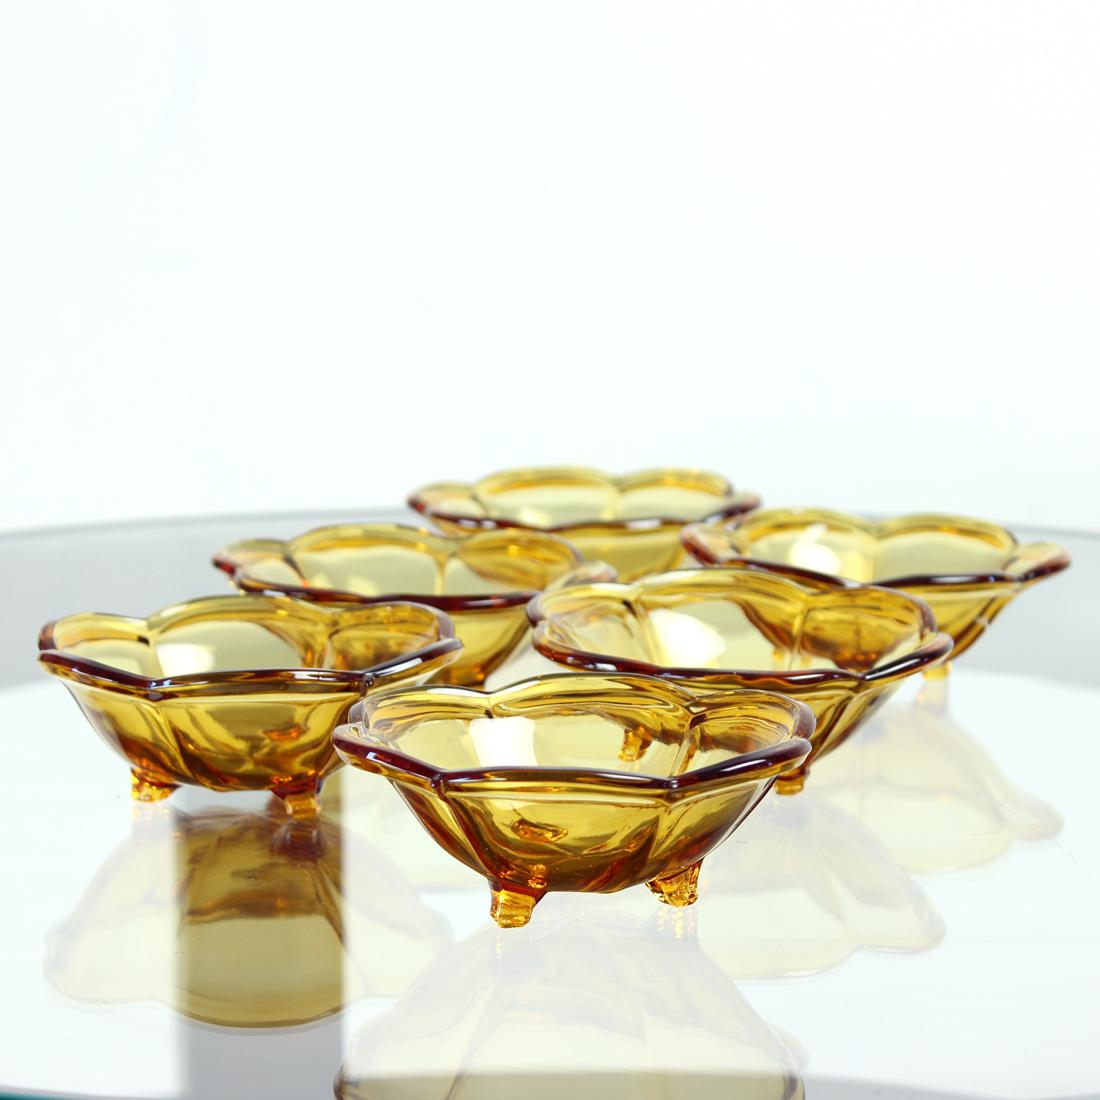 Set of 6 bowls produced in the Mid-century modern design era by the Czechoslovakian factory Borske Sklo Glass Union in 1960s. The model is in an official catalogue. Produced in pressed glass in amber color. Original, excellent condition. The bowls